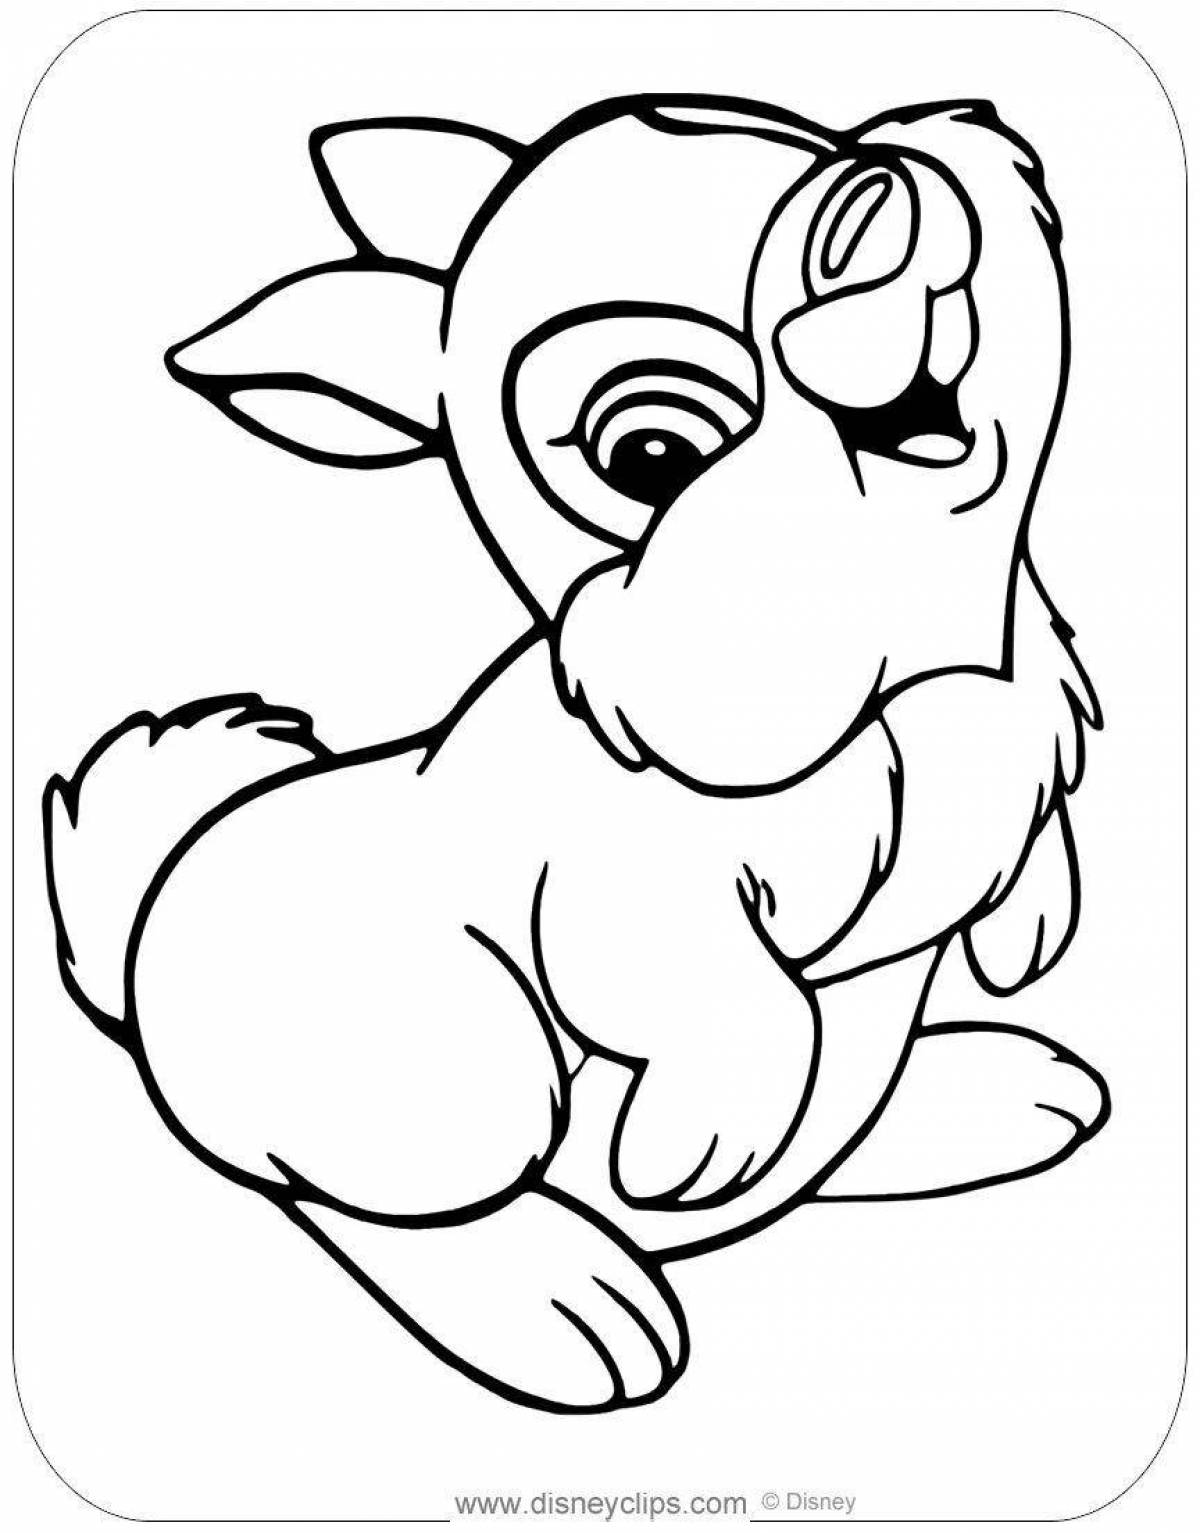 Outstanding disney animal coloring page